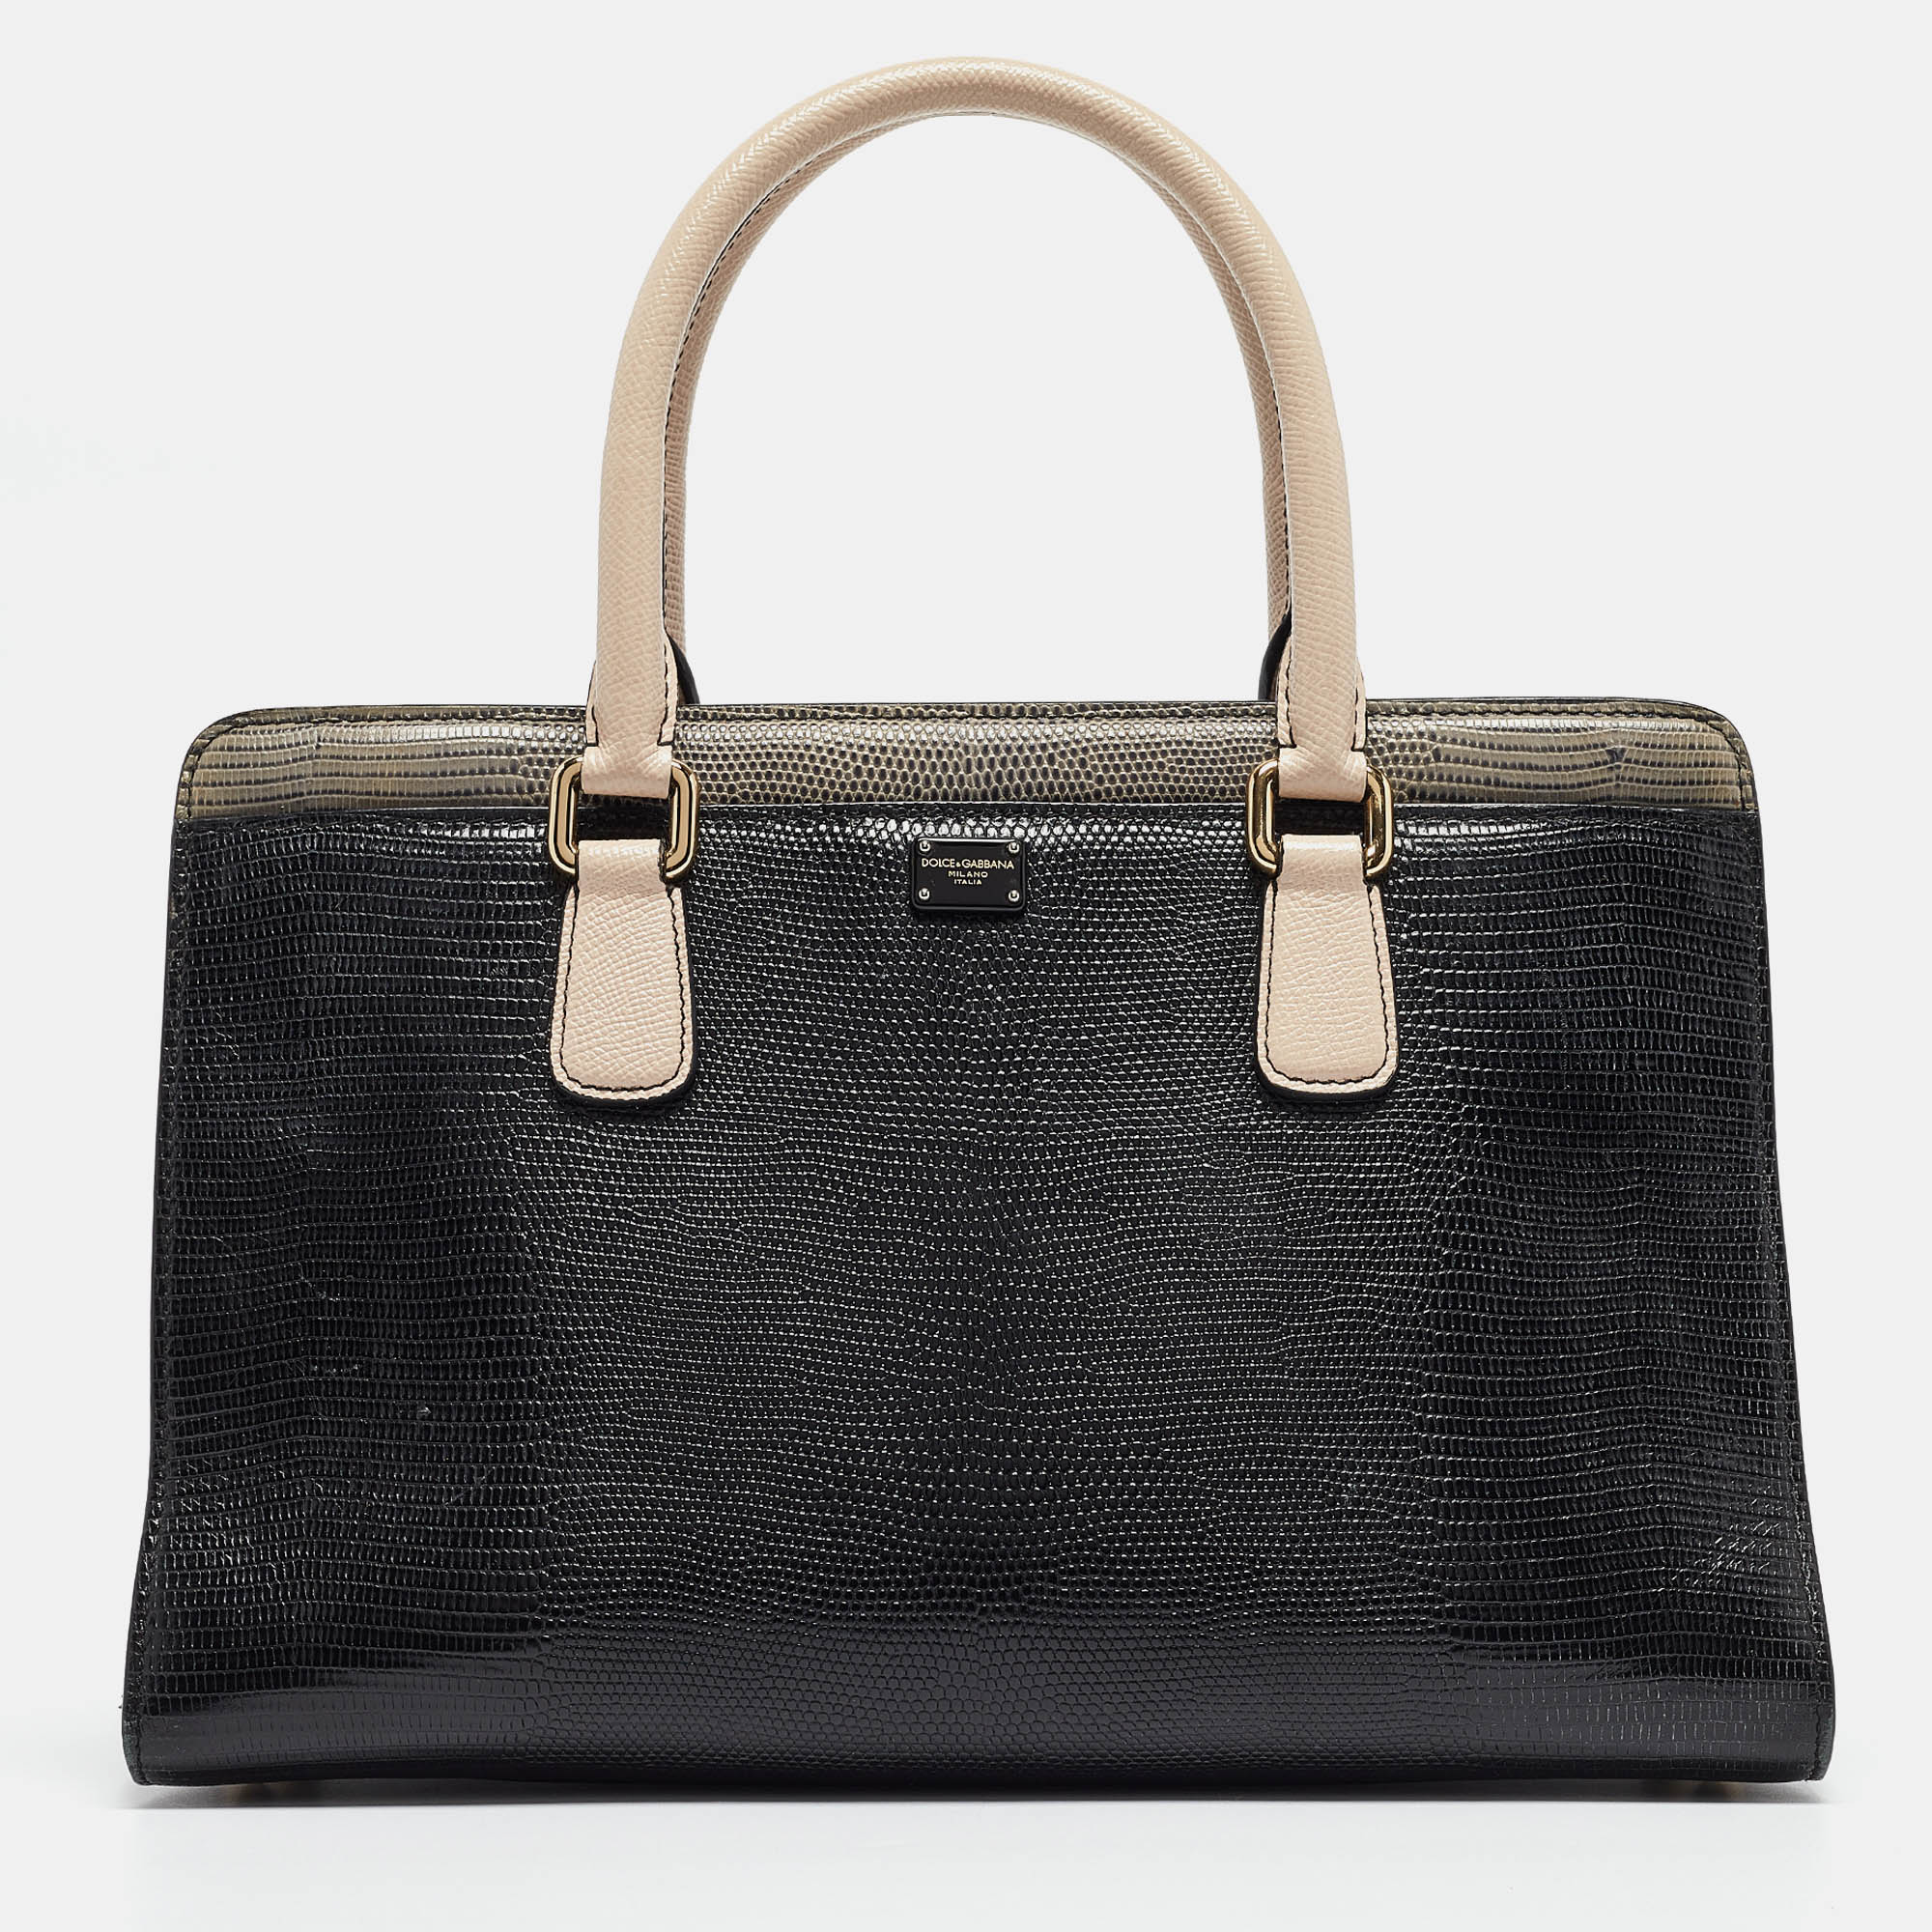 Dolce & gabbana tricolor lizard embossed leather and snakeskin tote